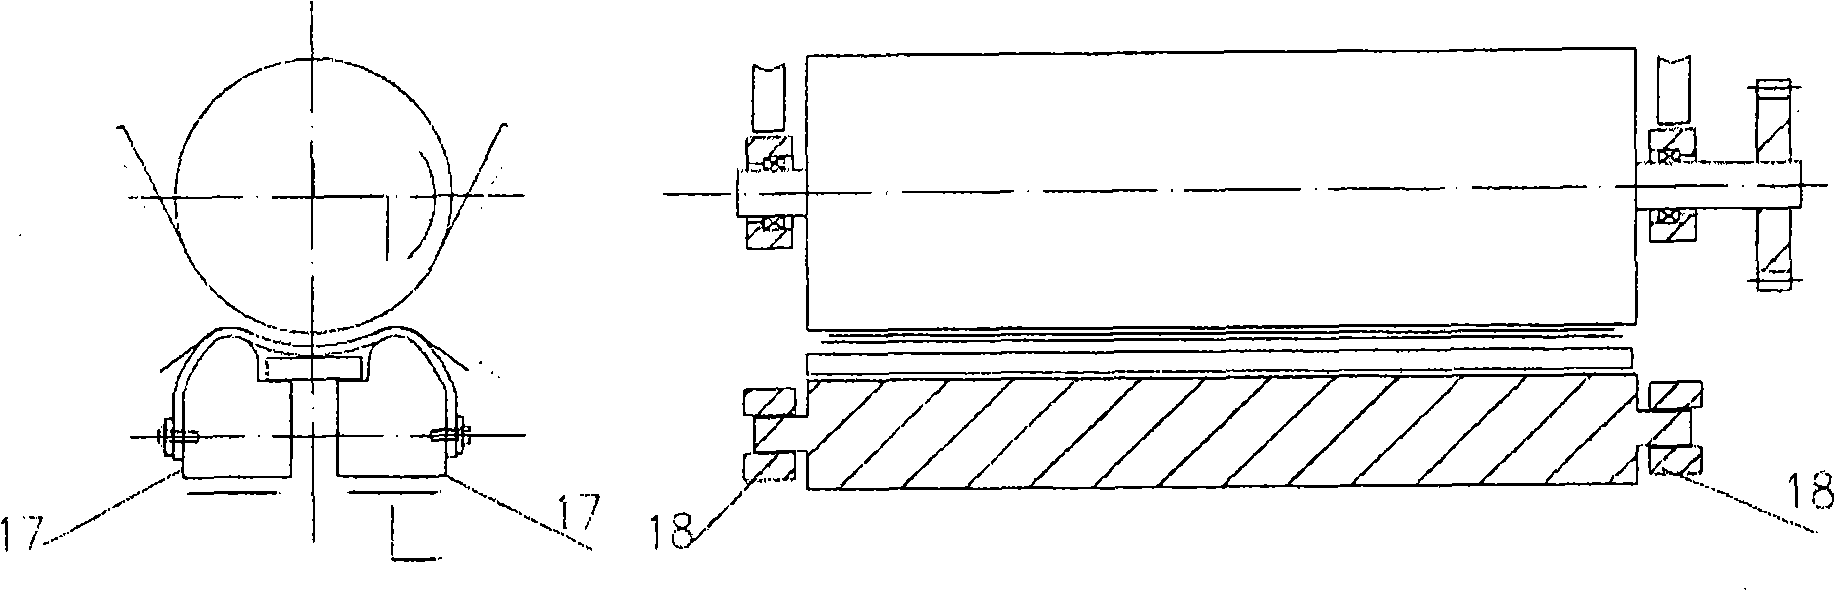 Transfer printing device for cold-transfer decorating machines